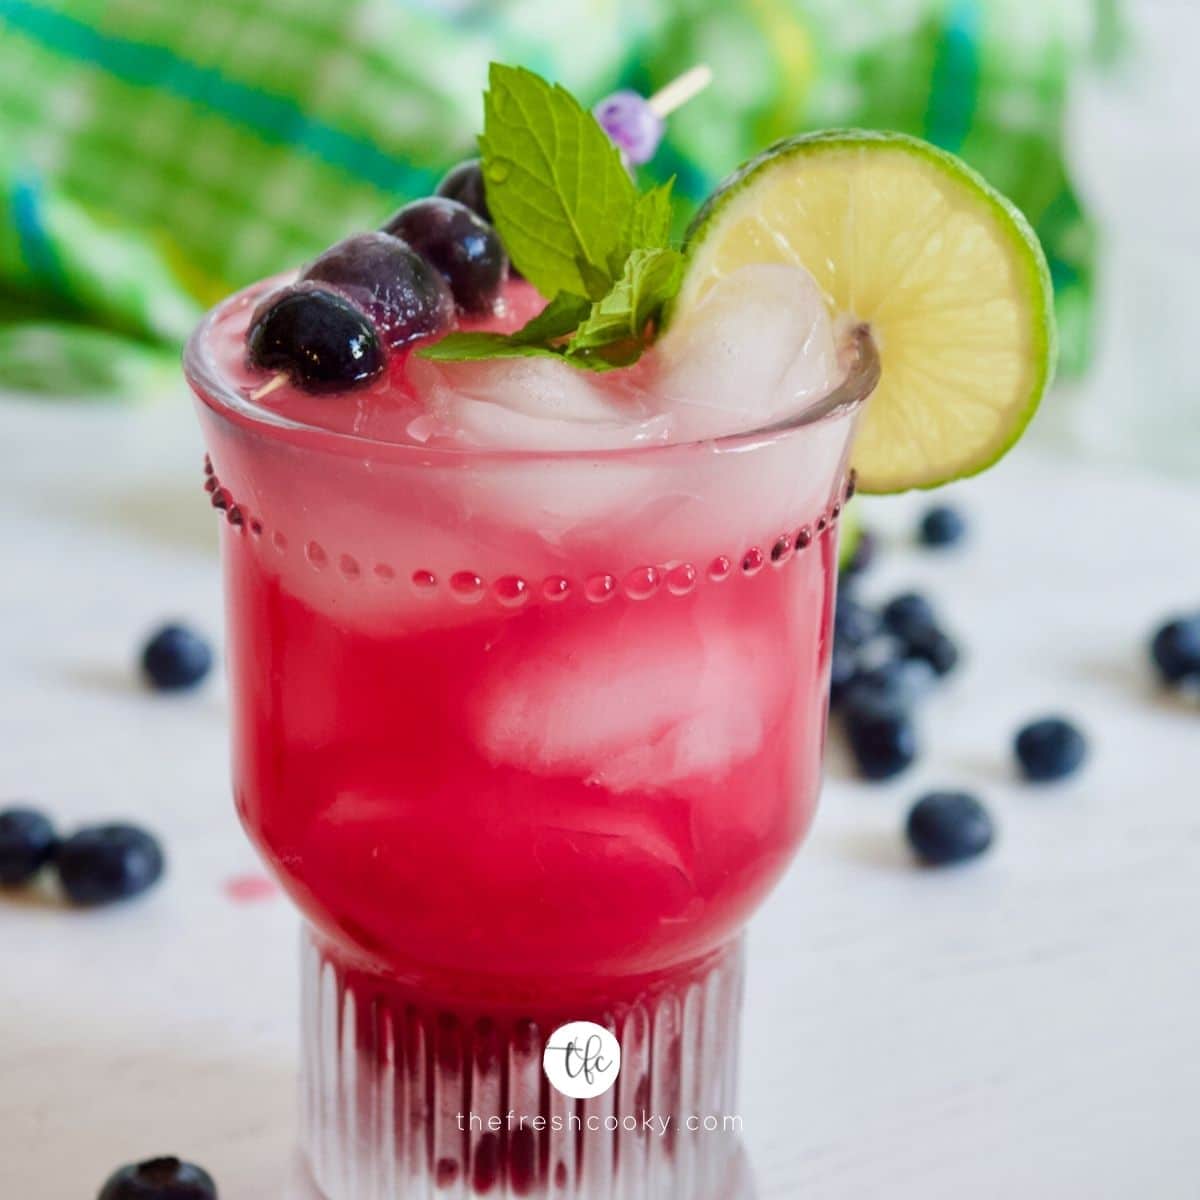 Image of a blueberry limeade drink in a pretty textured glass with a garnish of lime, mint and blueberries.